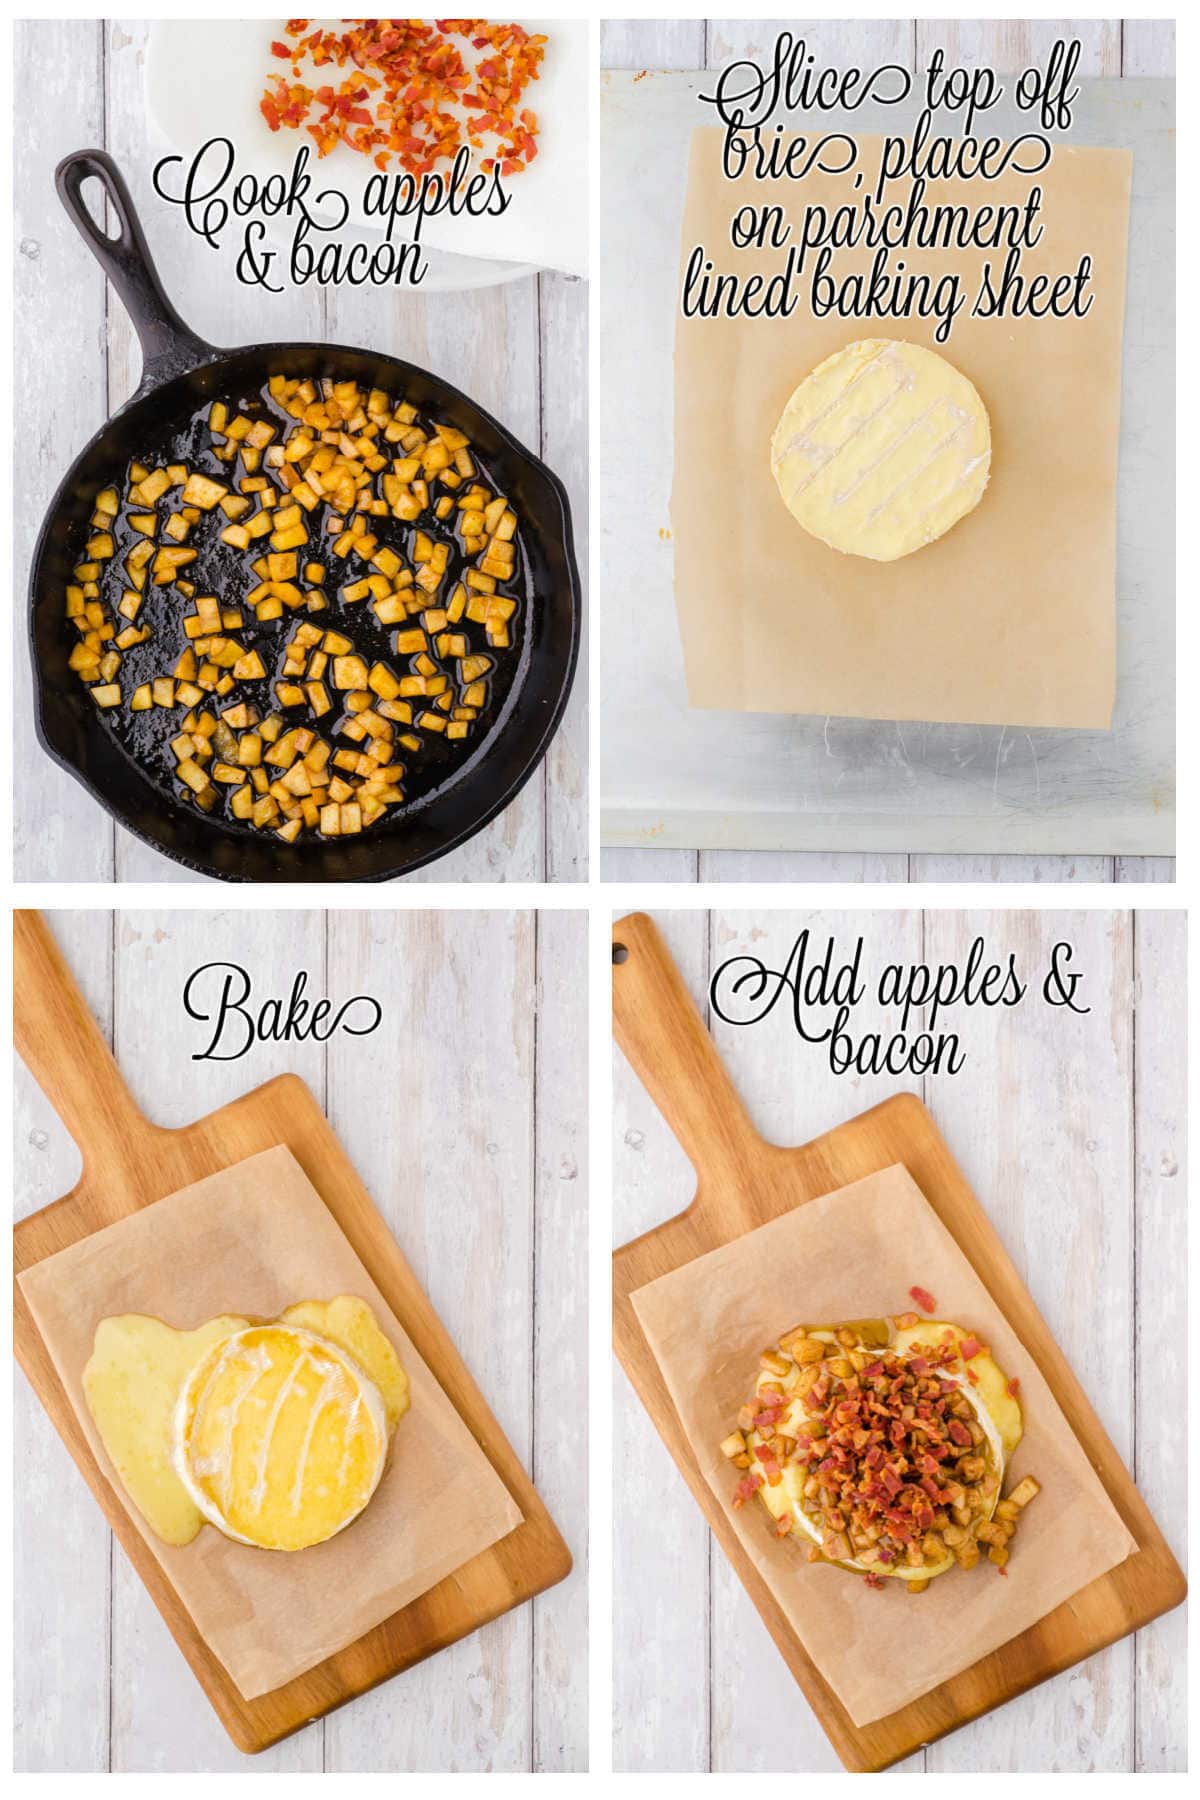 4 Step by step images for making this recipe.